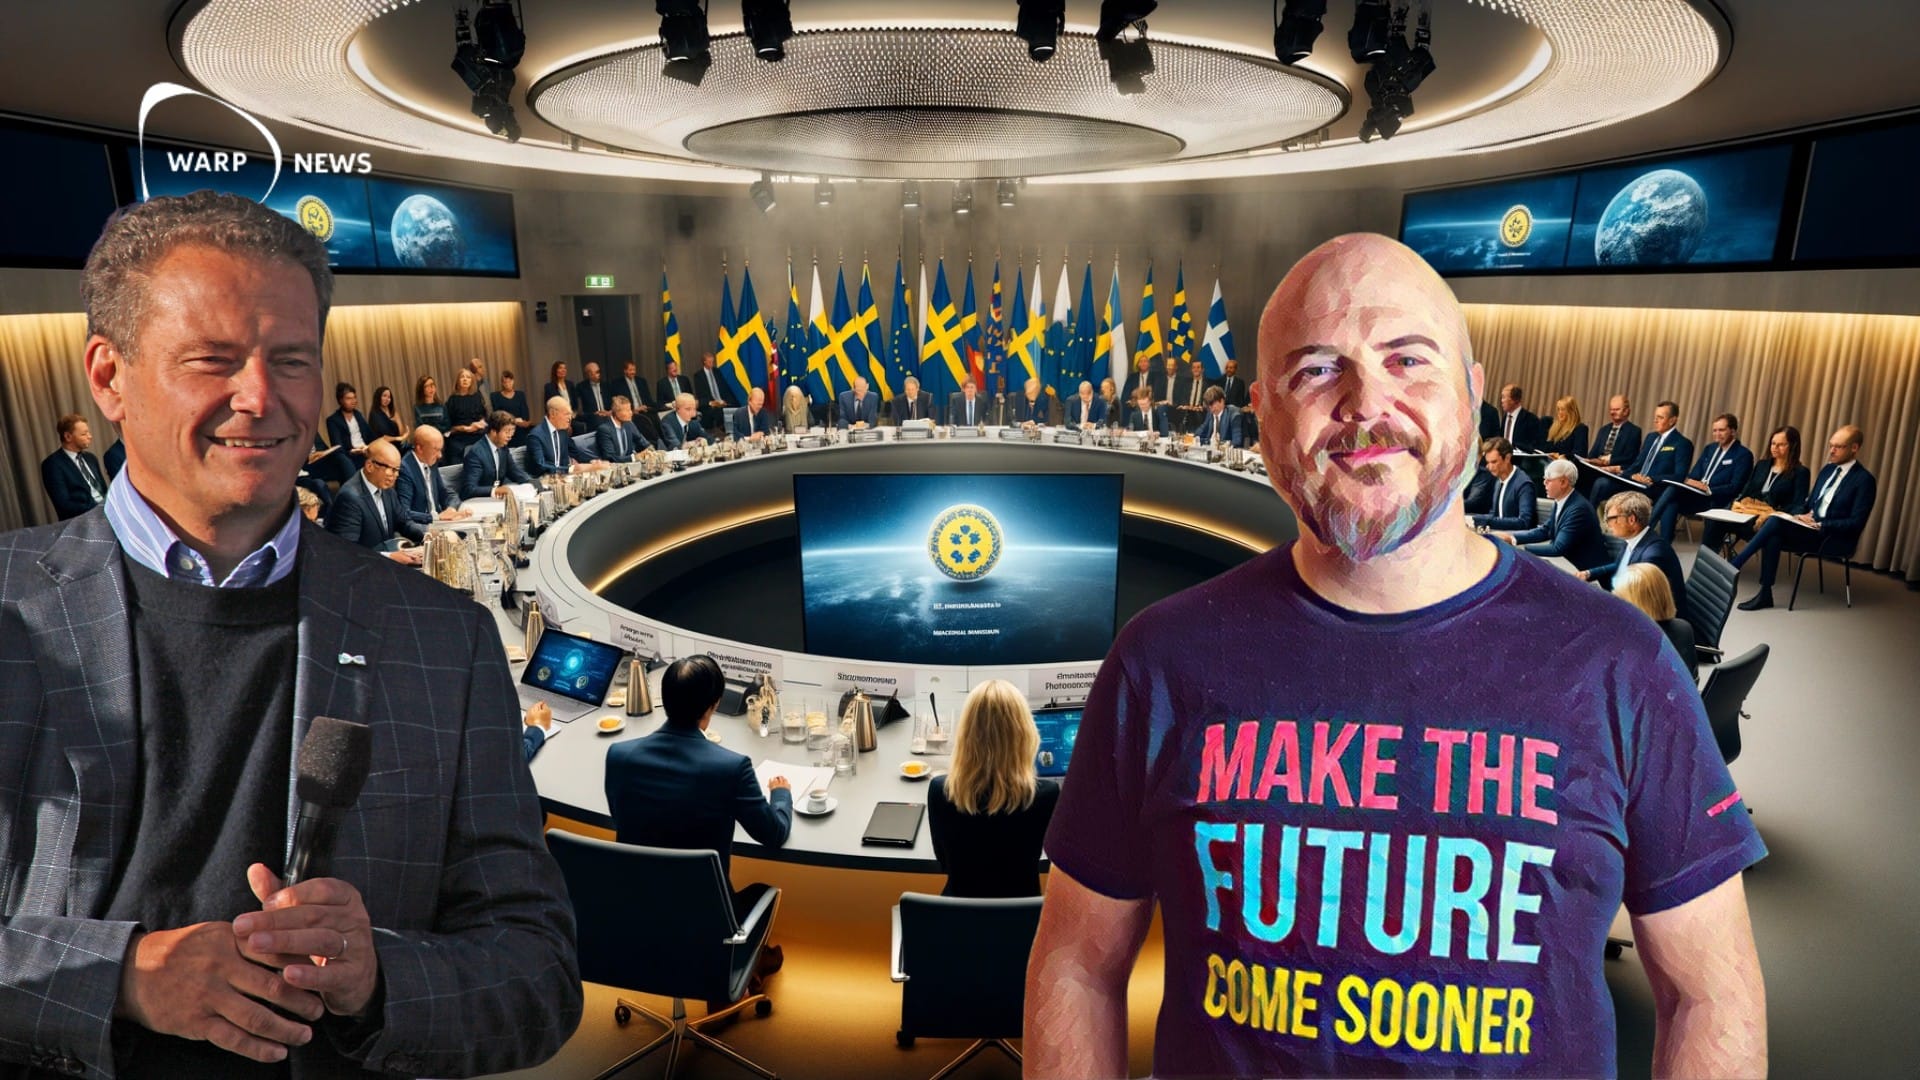 🦾 Member of the Swedish government's AI commission